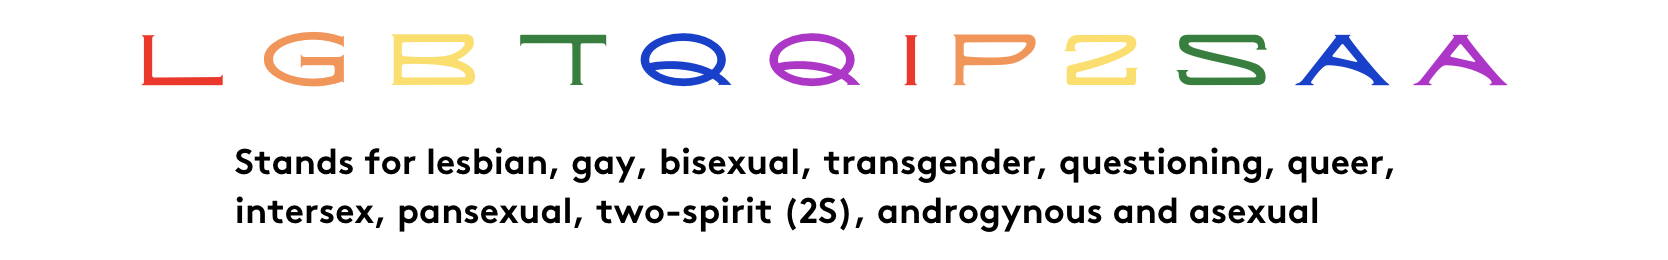 L: Lesbian, G: Gay, B: Bisexual, T: Transgender, Q: Questioning, Q: Queer, I: Intersex, P: Pansexual, 2S: Two-Spirit, A: Androgynous, A: Asexual